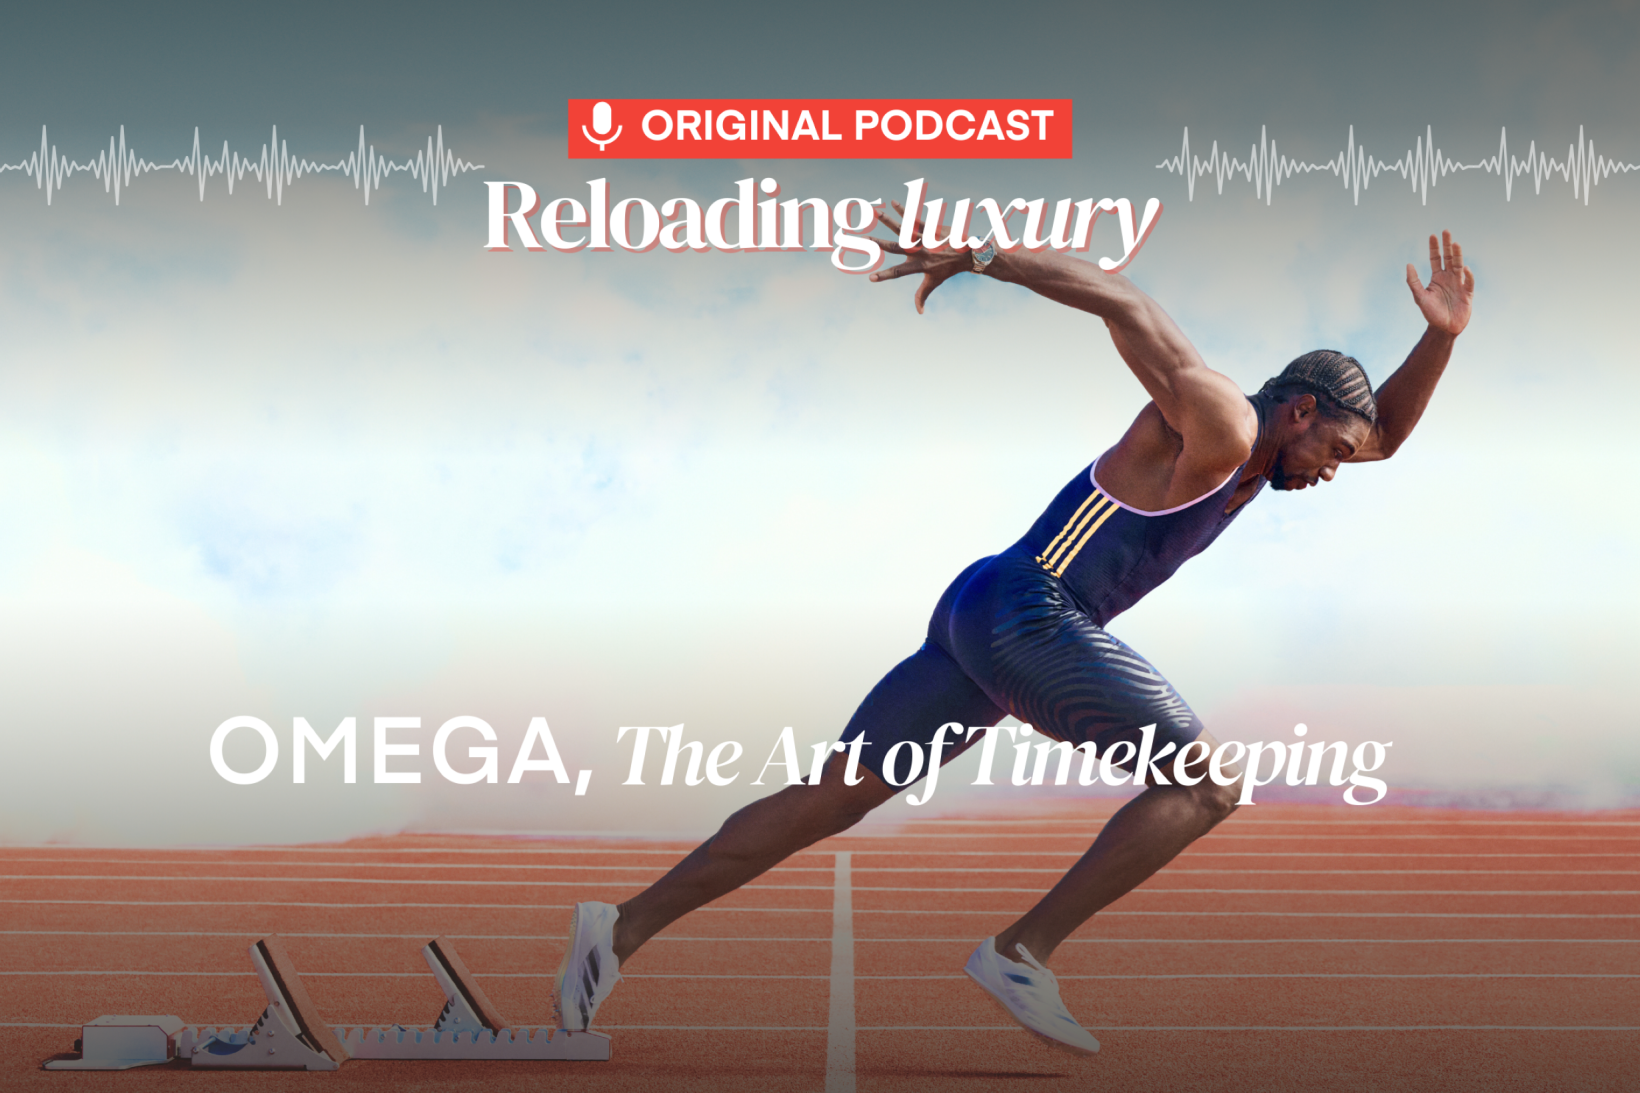 PODCAST. OMEGA. The Art of Timekeeping